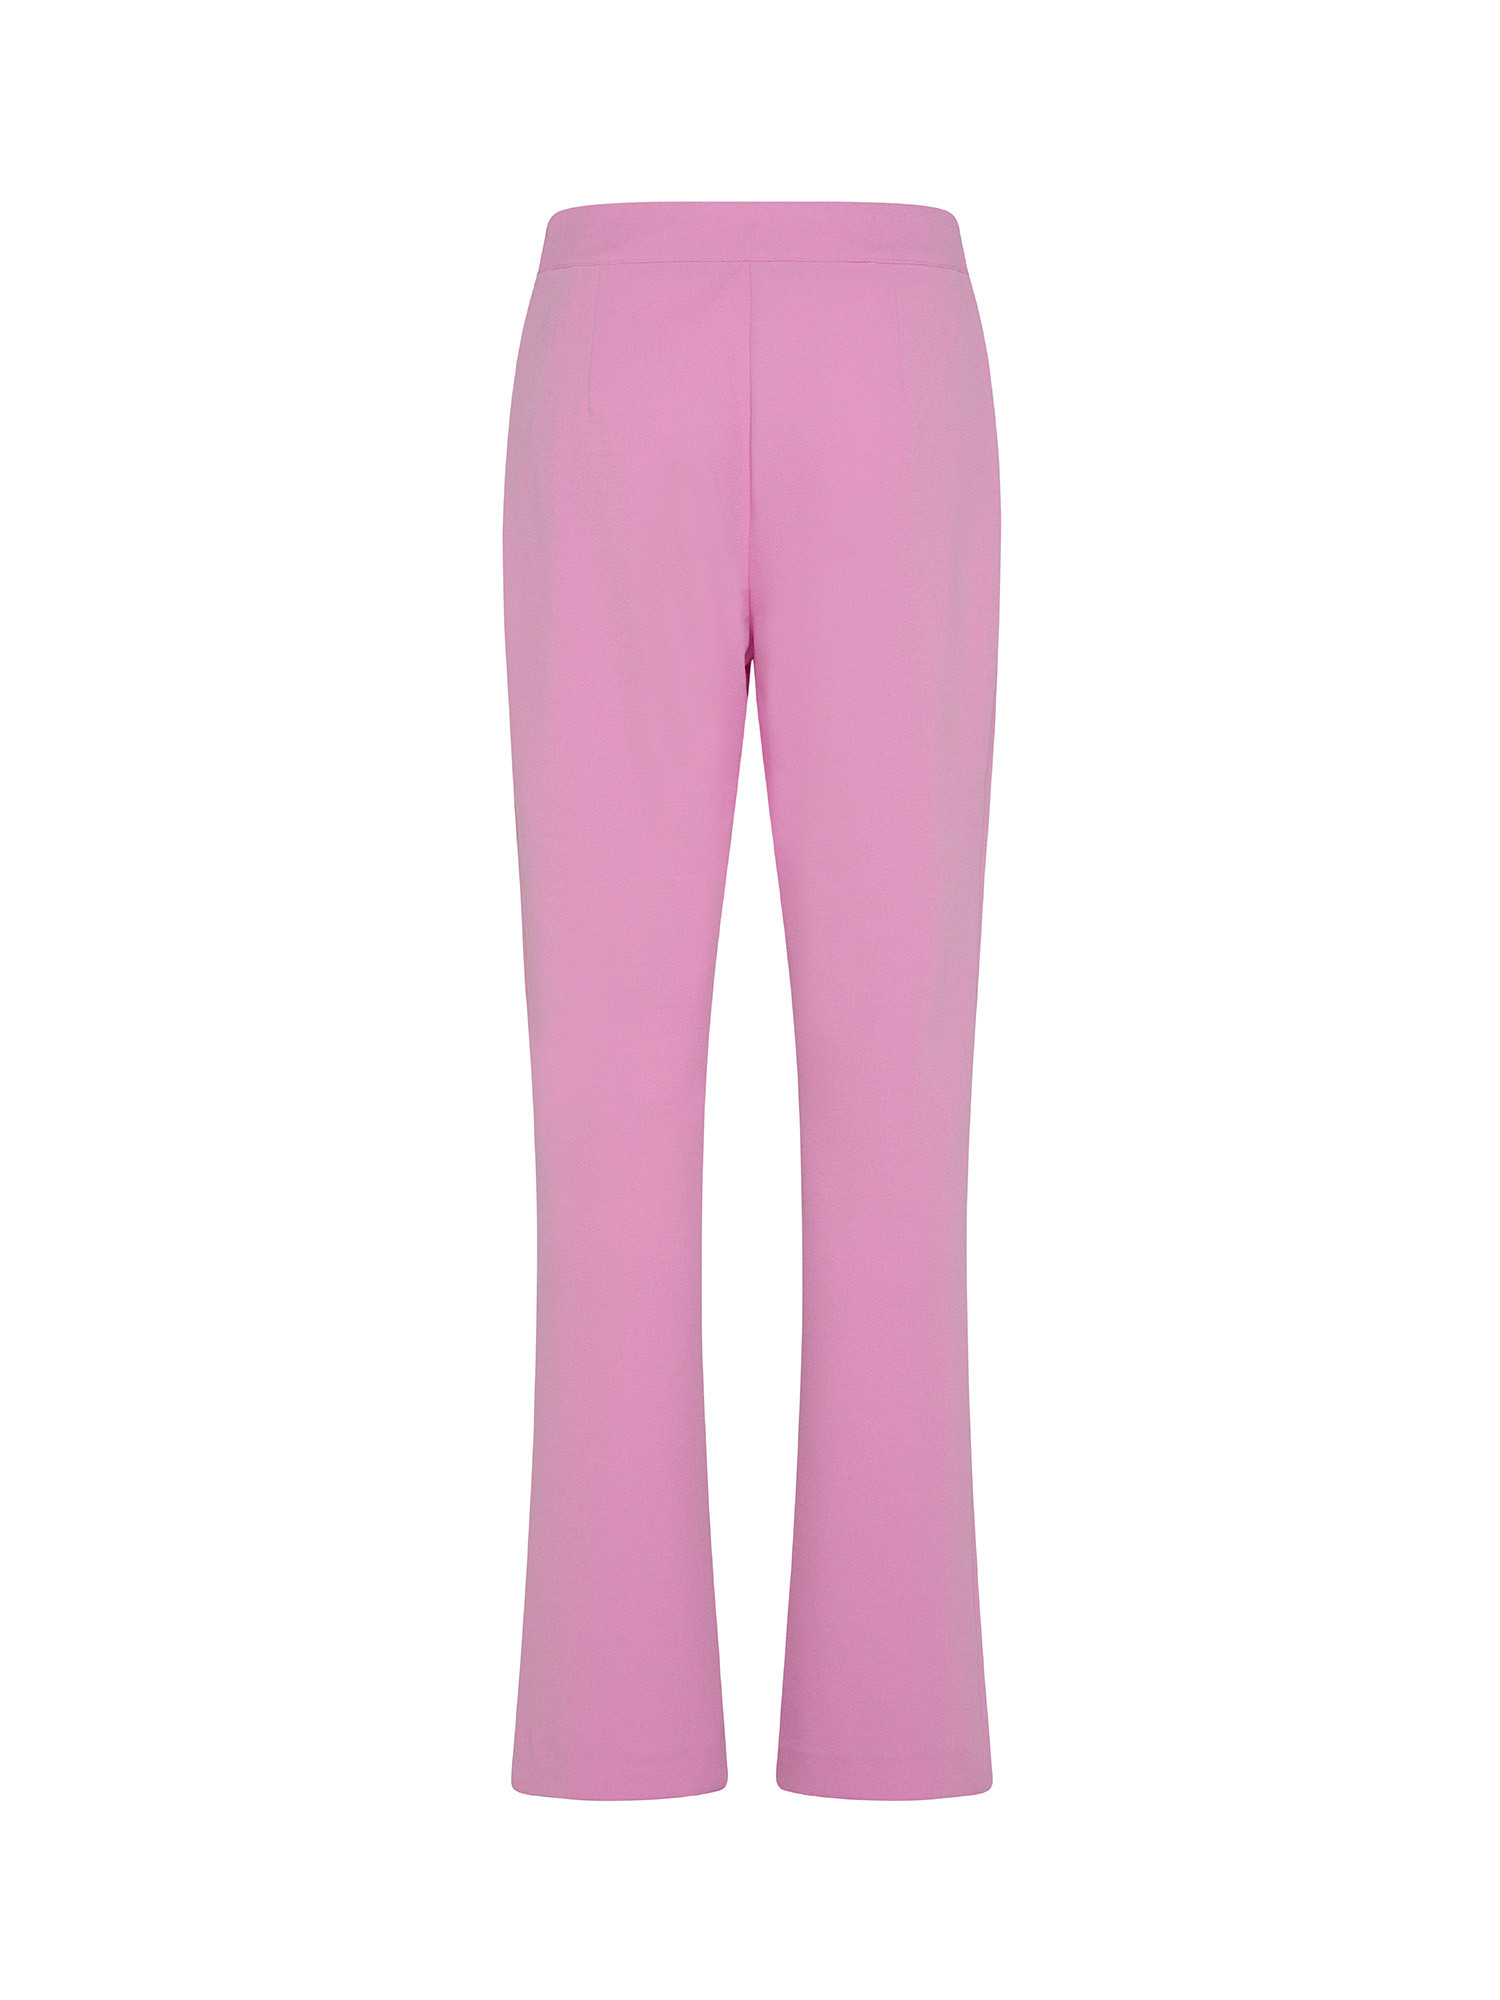 Koan - Crepe trousers with slits, Pink, large image number 1